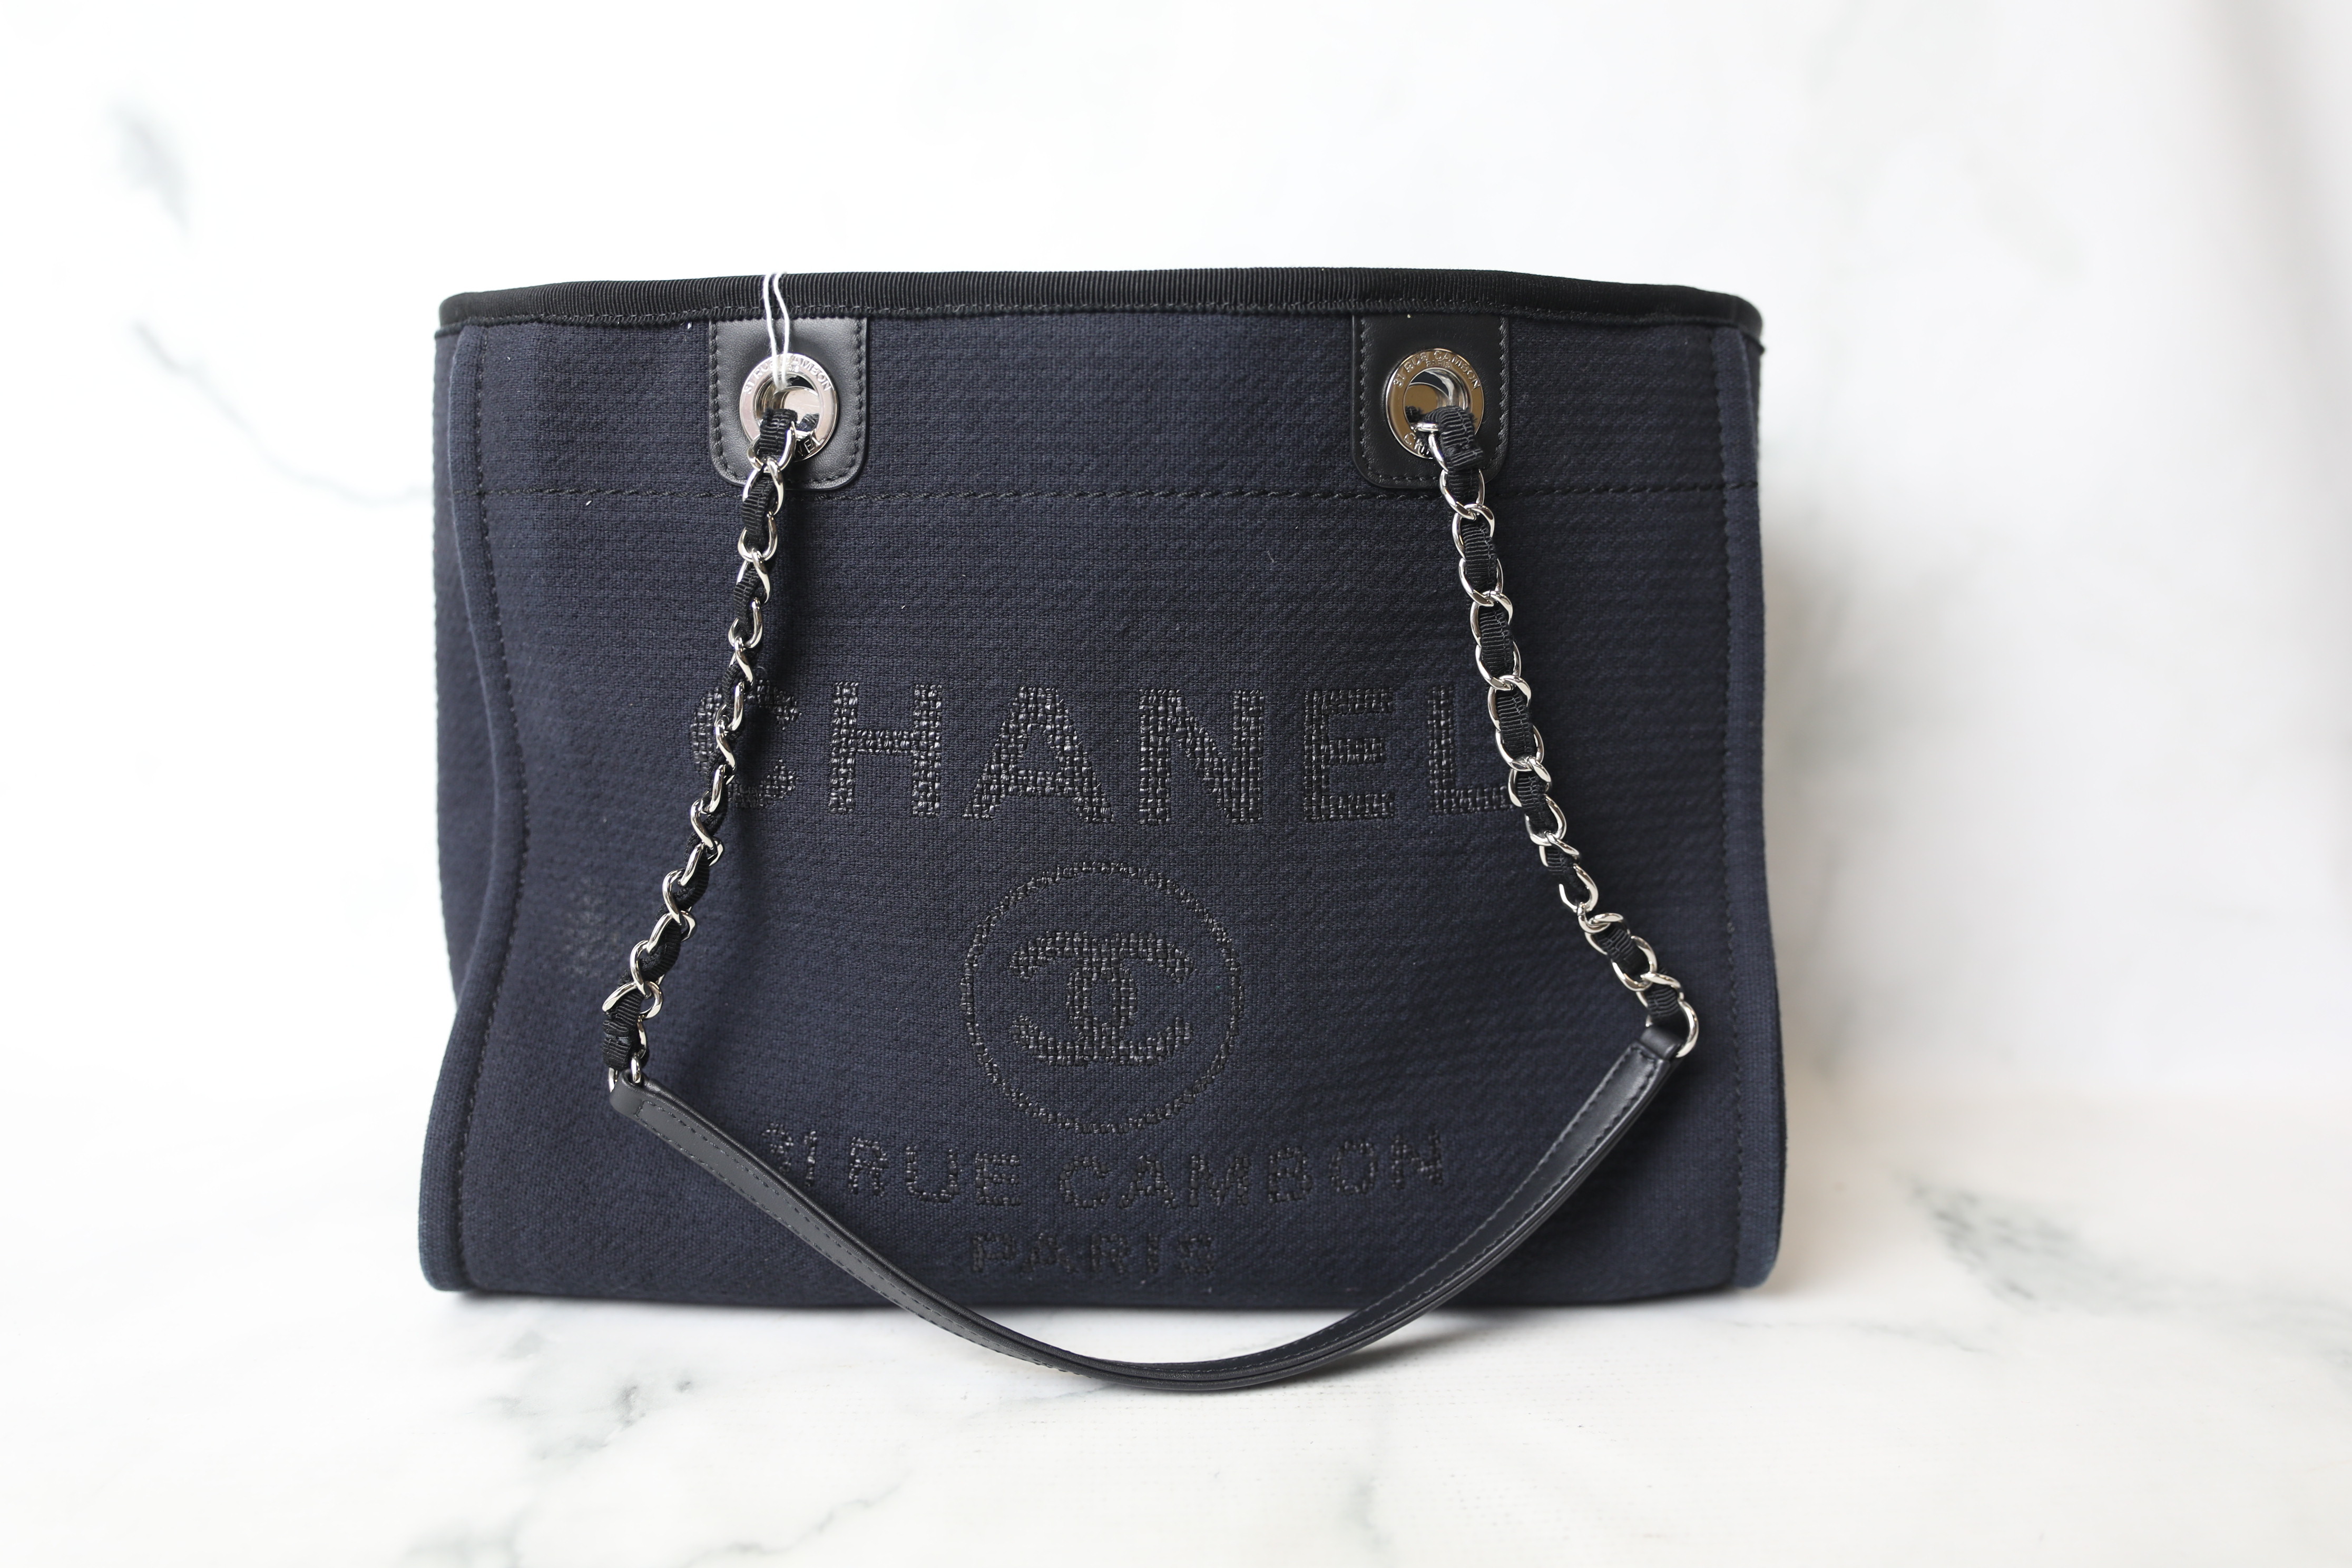 Chanel Deauville Small Tote Bag, Black Fabric with Silver Hardware,  Preowned in Box WA001